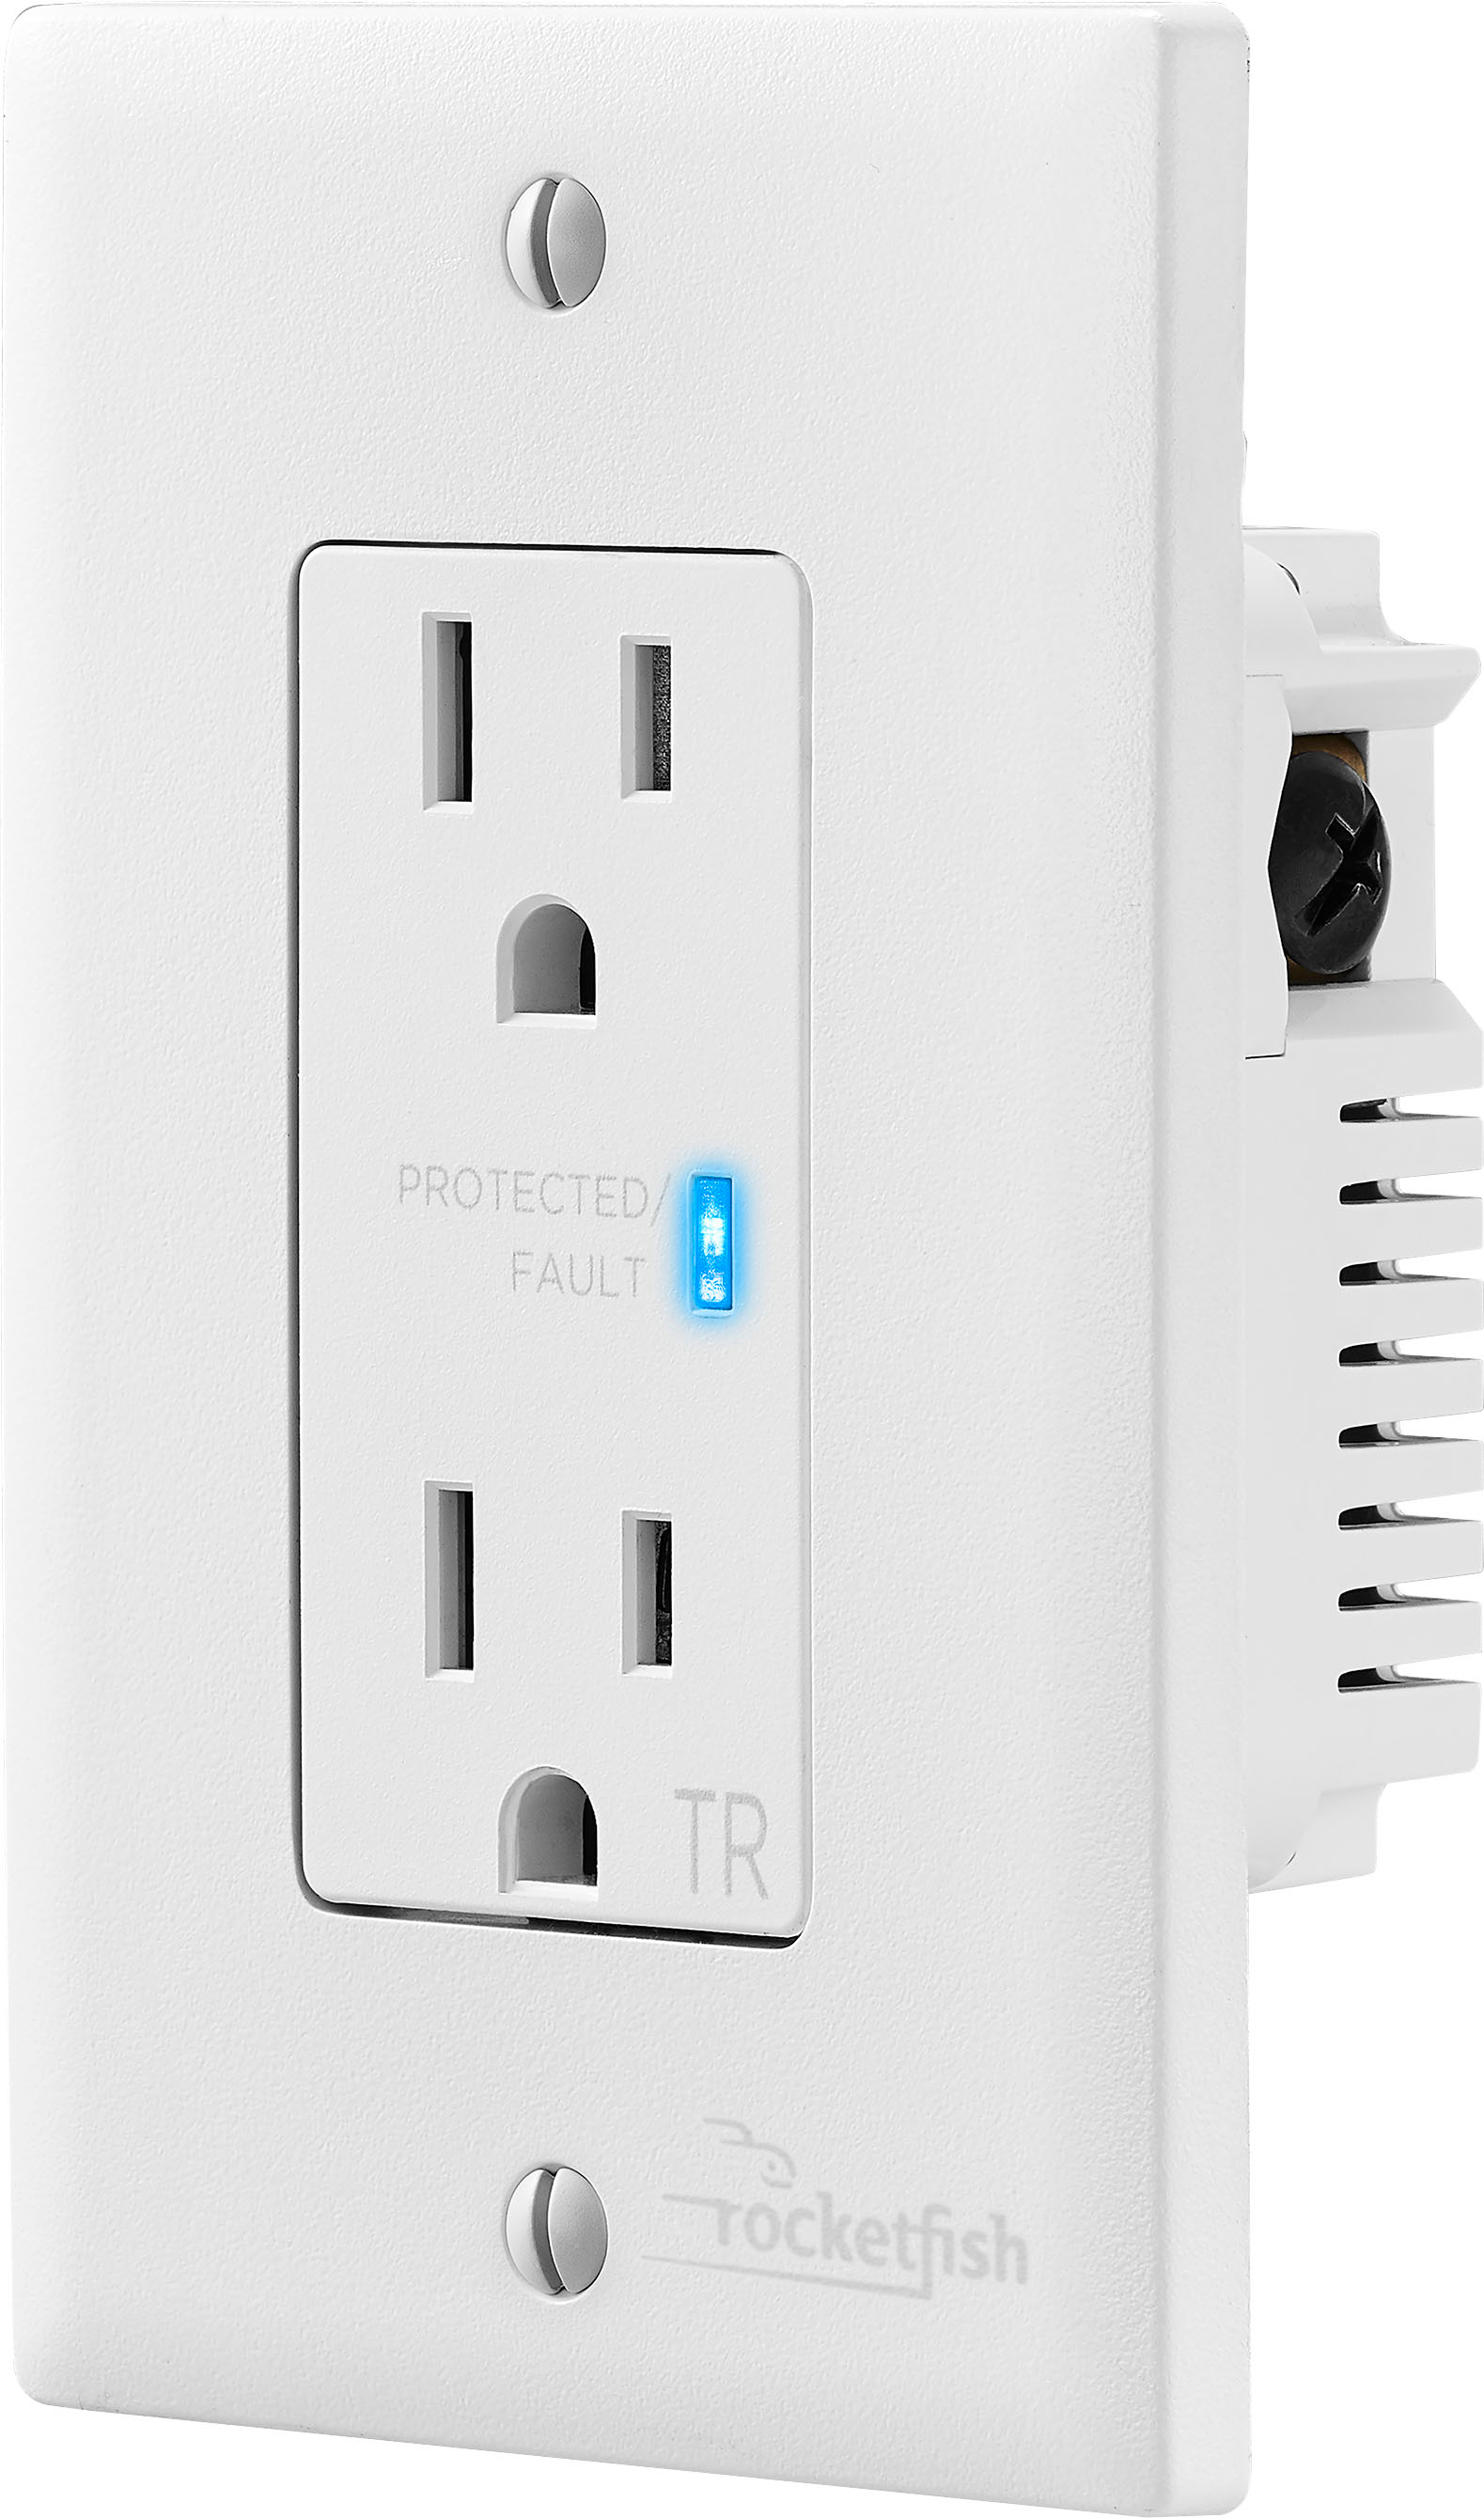 Rocketfish - 2-Outlet In-Wall Surge Protector - White